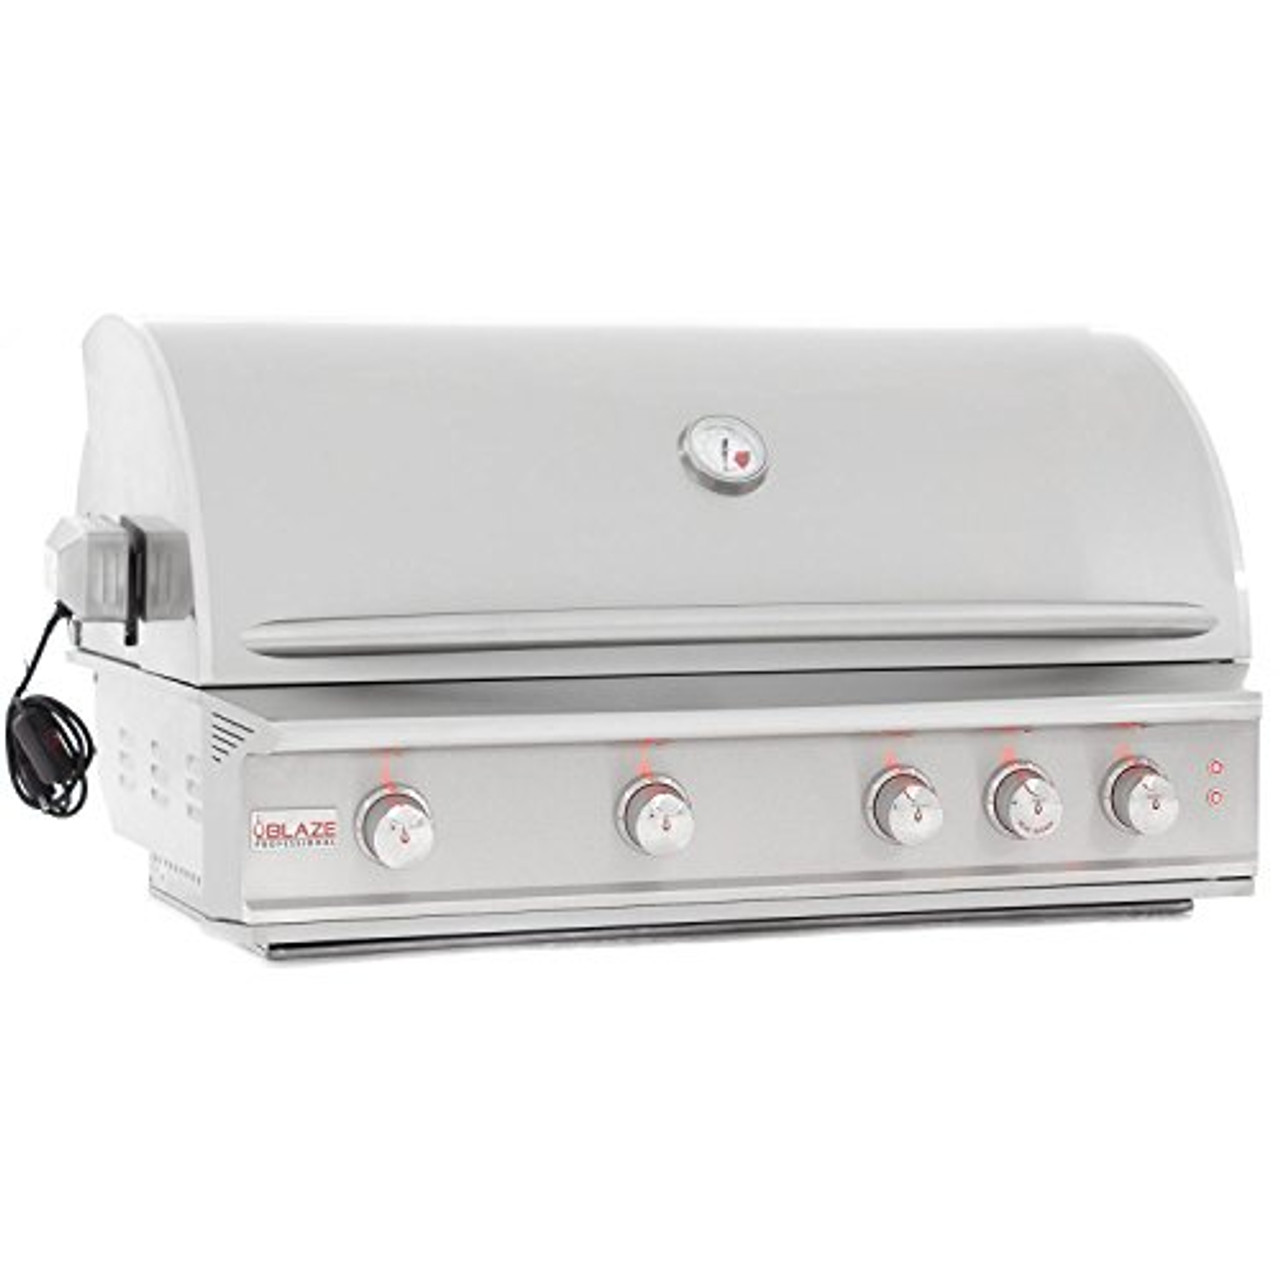 Astrolabium Turbine James Dyson Blaze Professional 44" Built-in Natural Gas Grill With Rear Infrared Burner  - Blz-4pro-ng